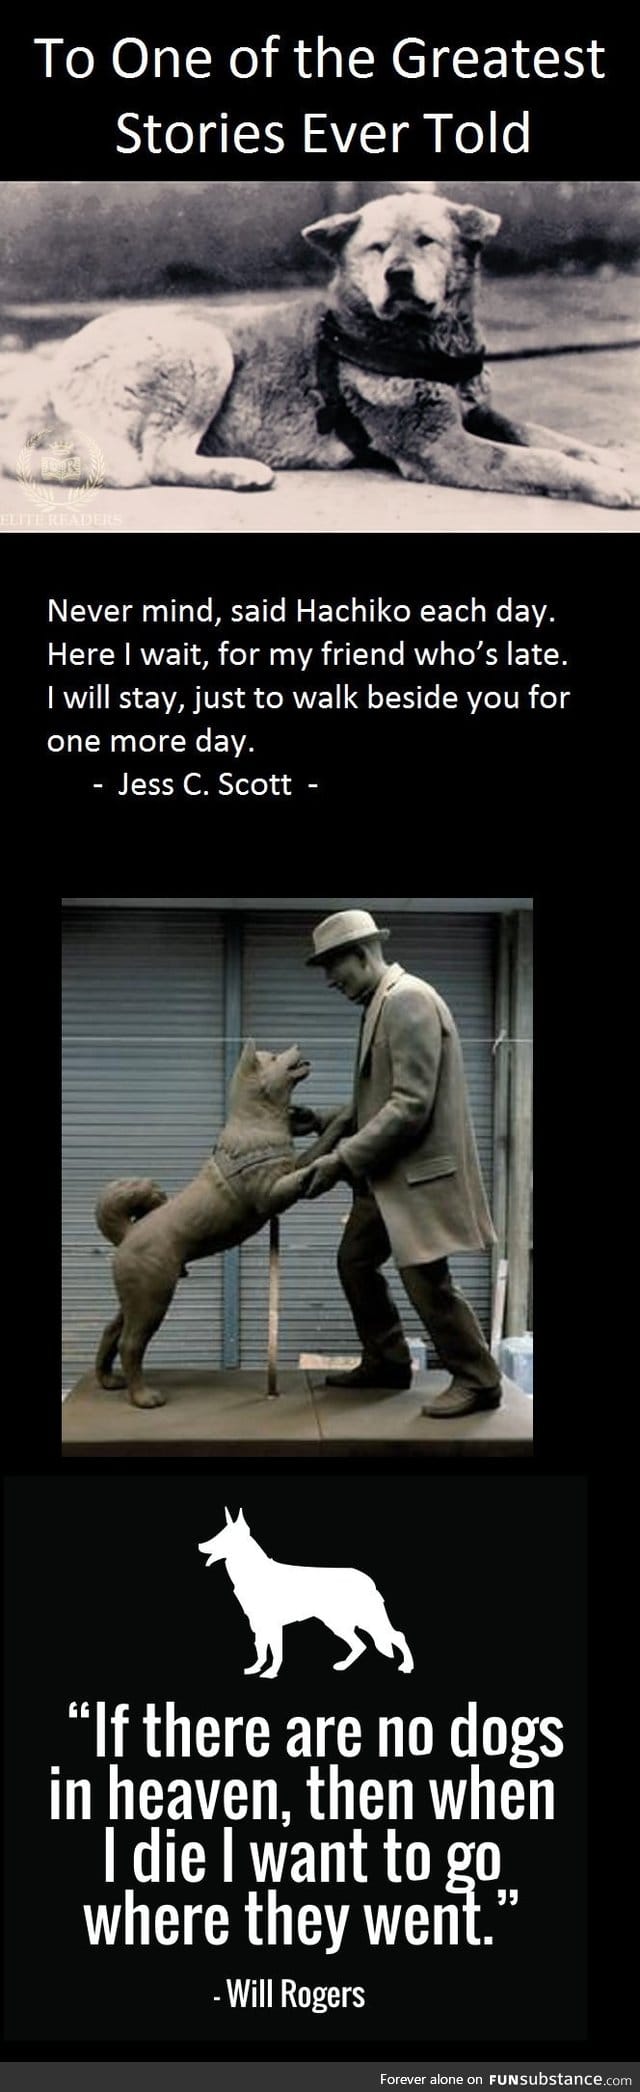 A Moment of Silence: Hachiko died on March 8, 1935